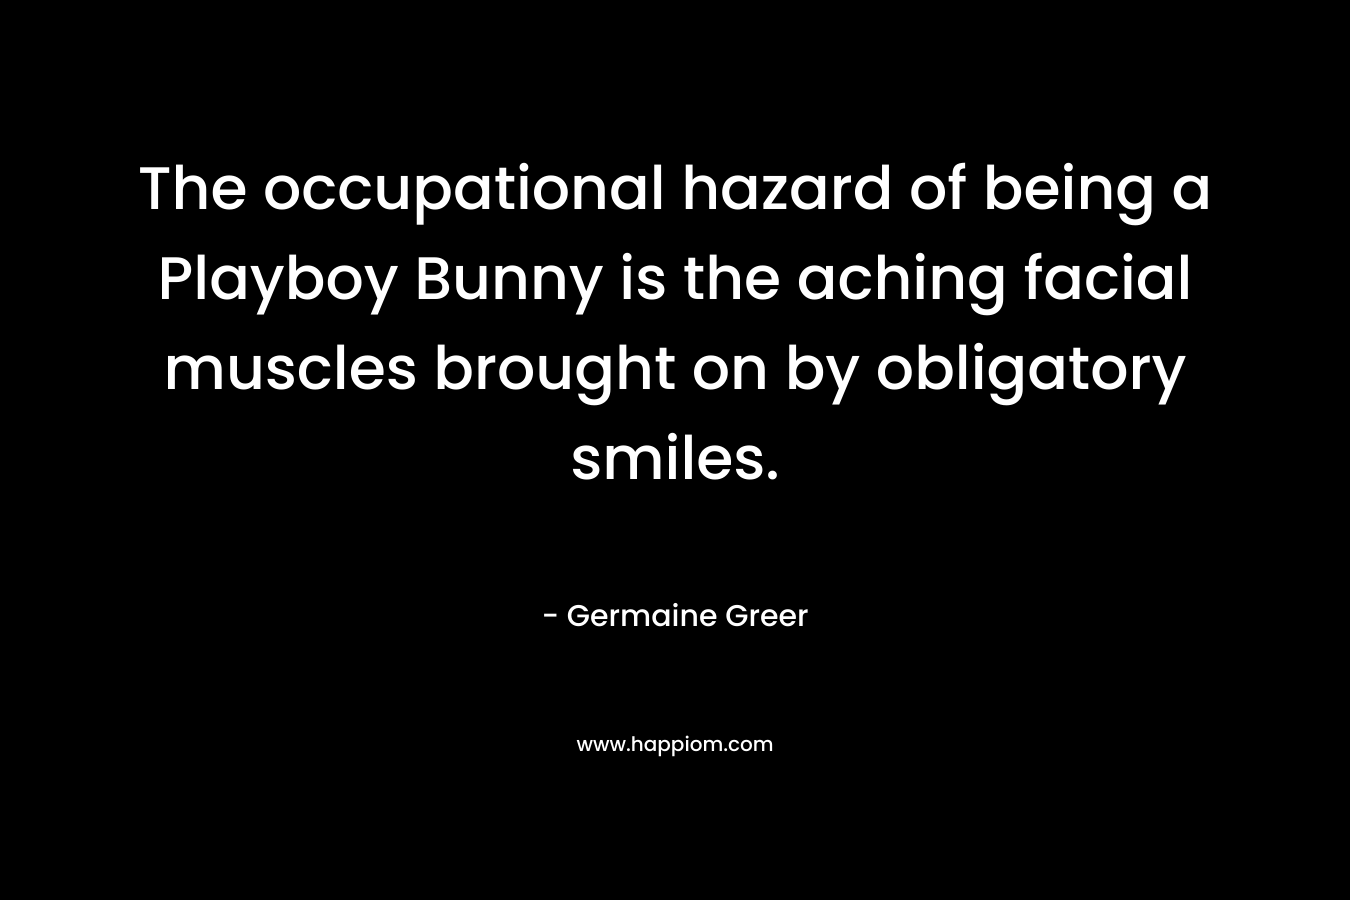 The occupational hazard of being a Playboy Bunny is the aching facial muscles brought on by obligatory smiles. – Germaine Greer